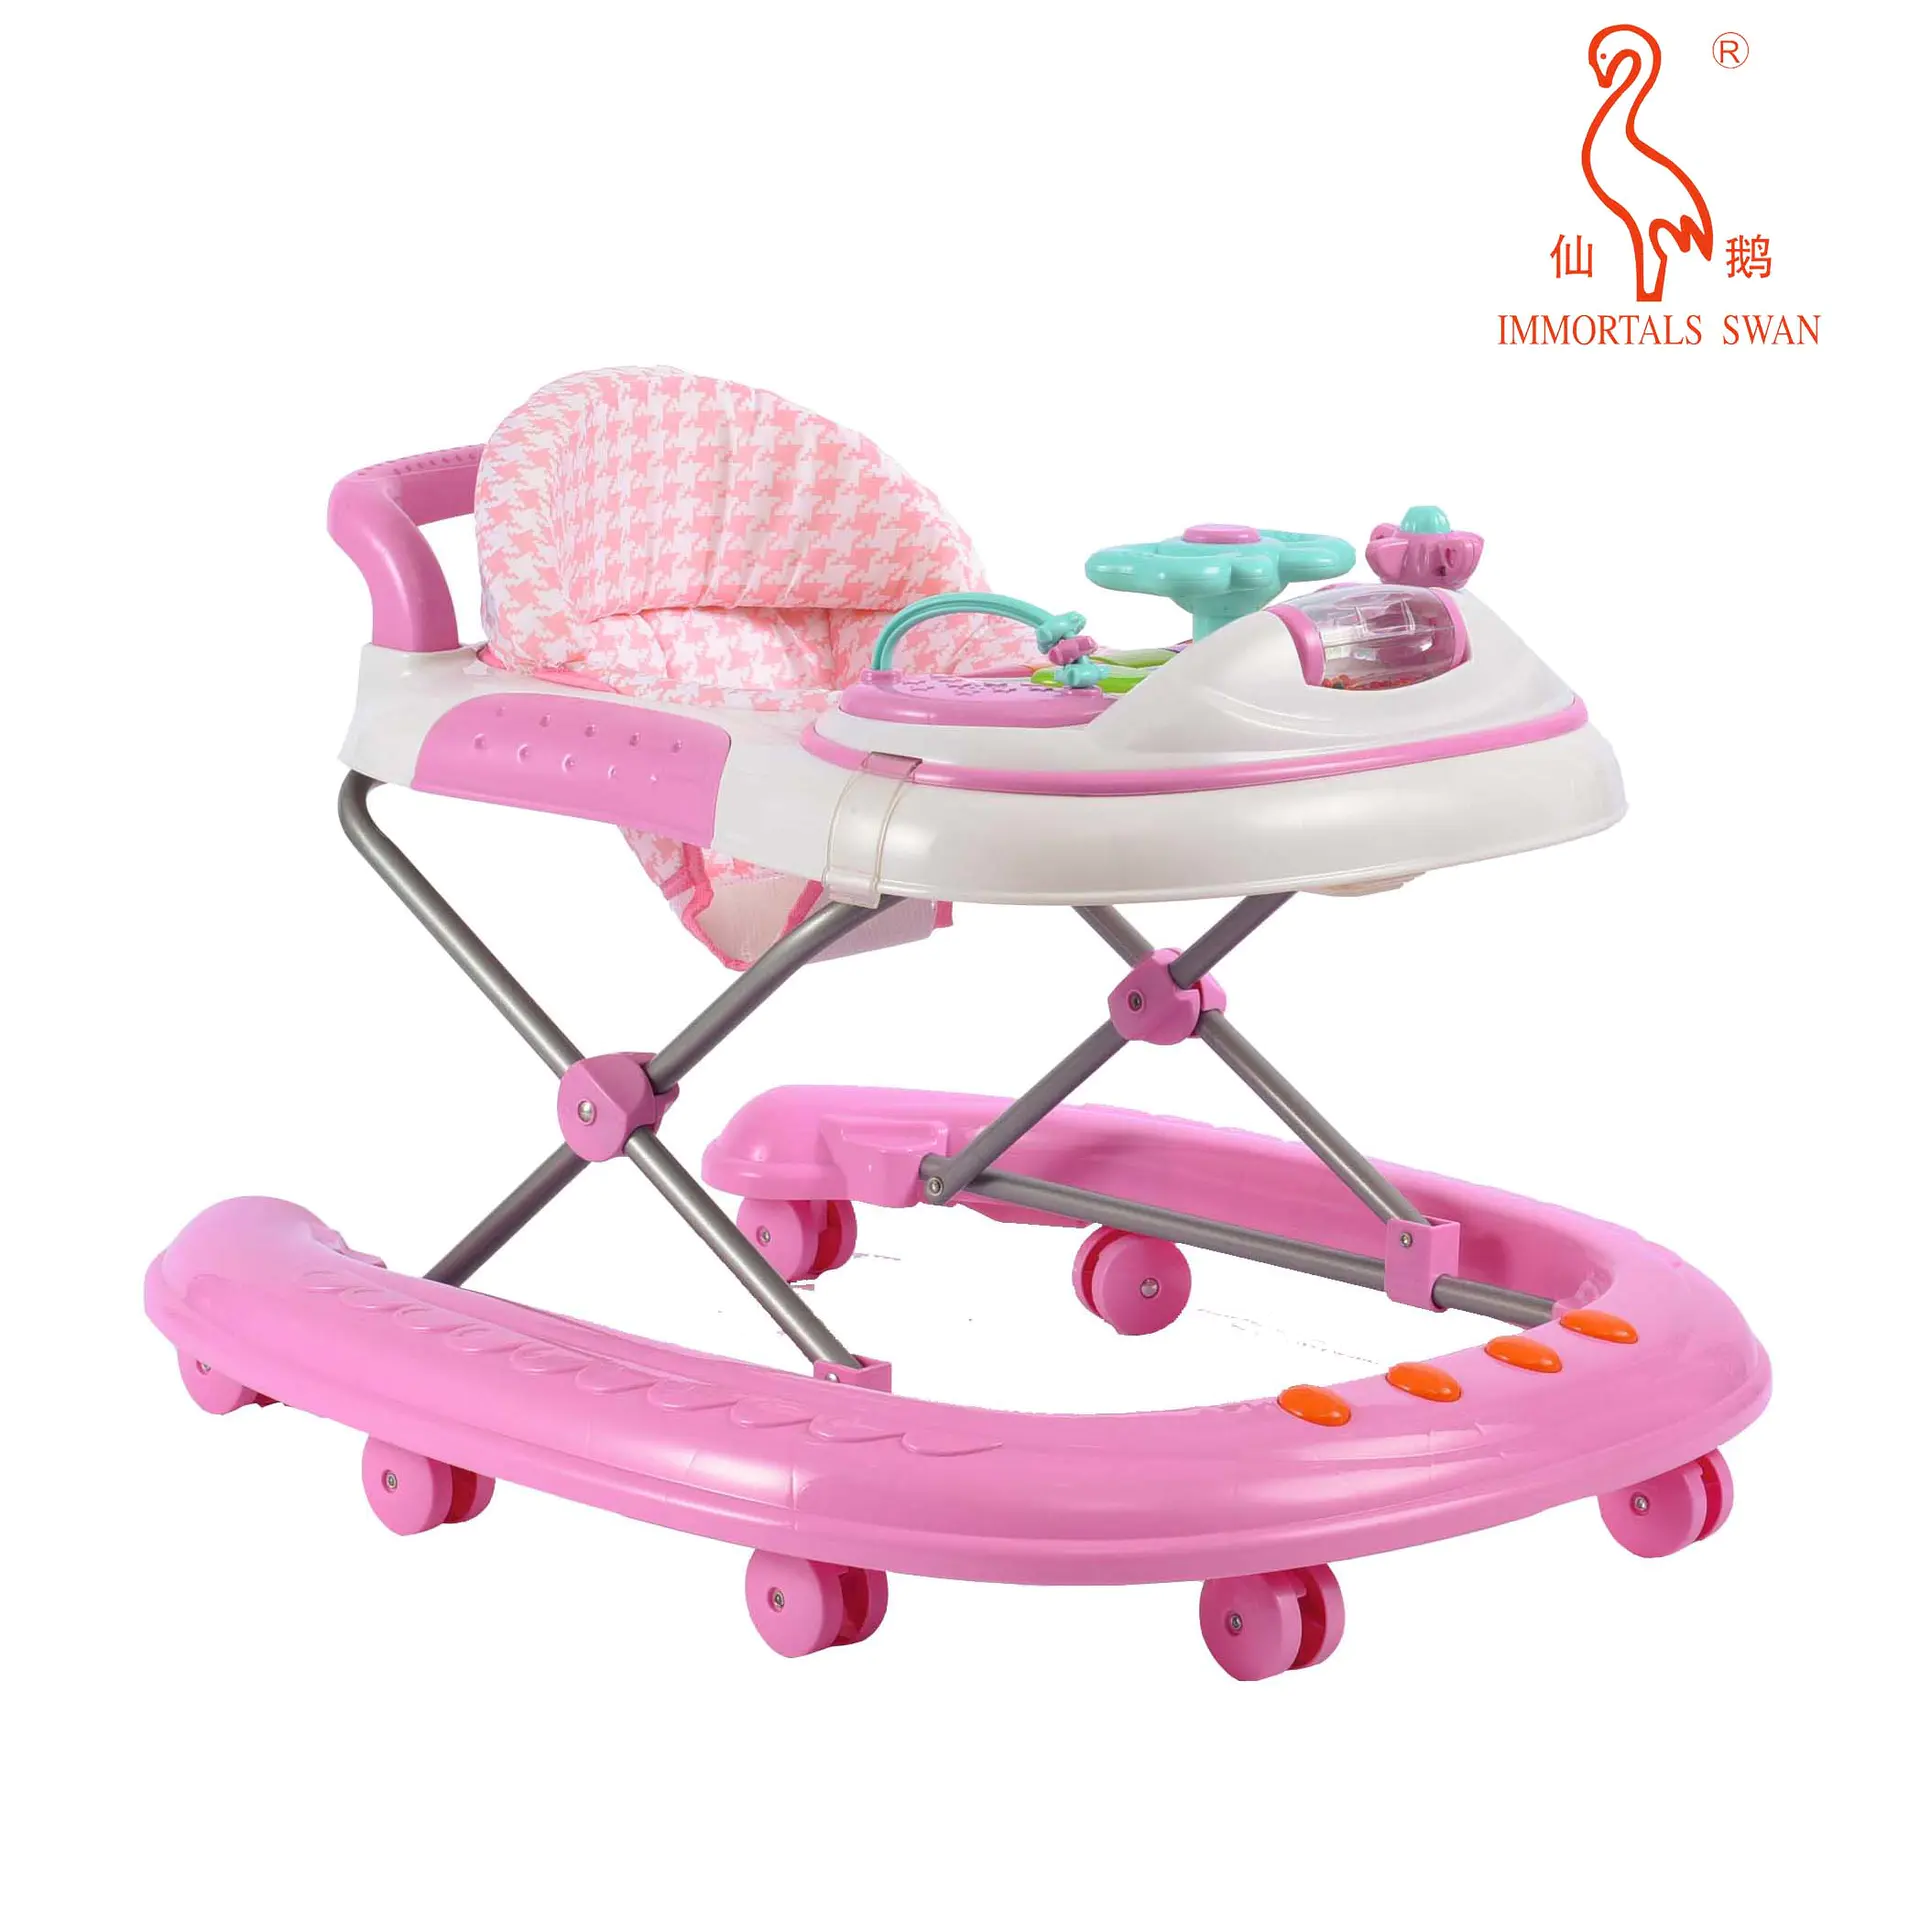 Wholesale Baby Walker with Easy Fold Frame for Storage, Ages 6 months Plus With Good Price-Aoqi